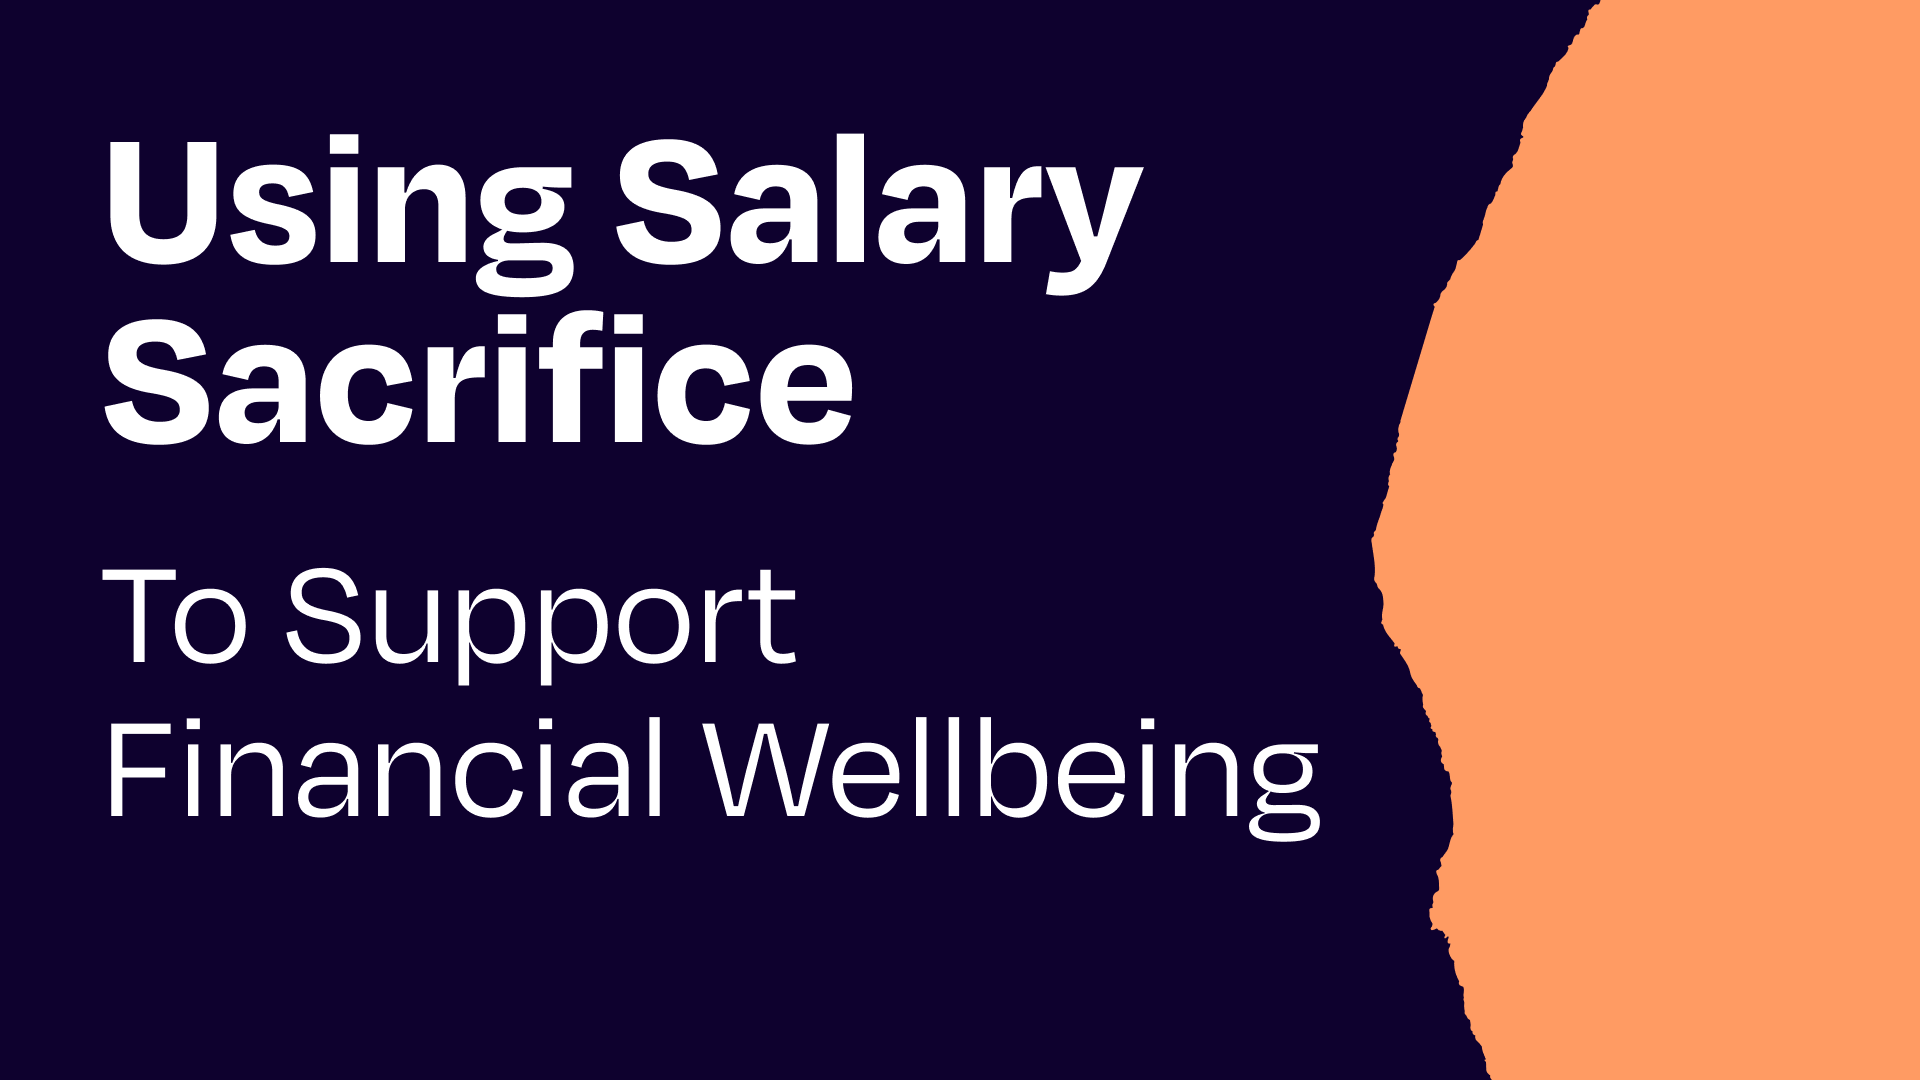 Using Salary Sacrifice to Support Financial Wellbeing!